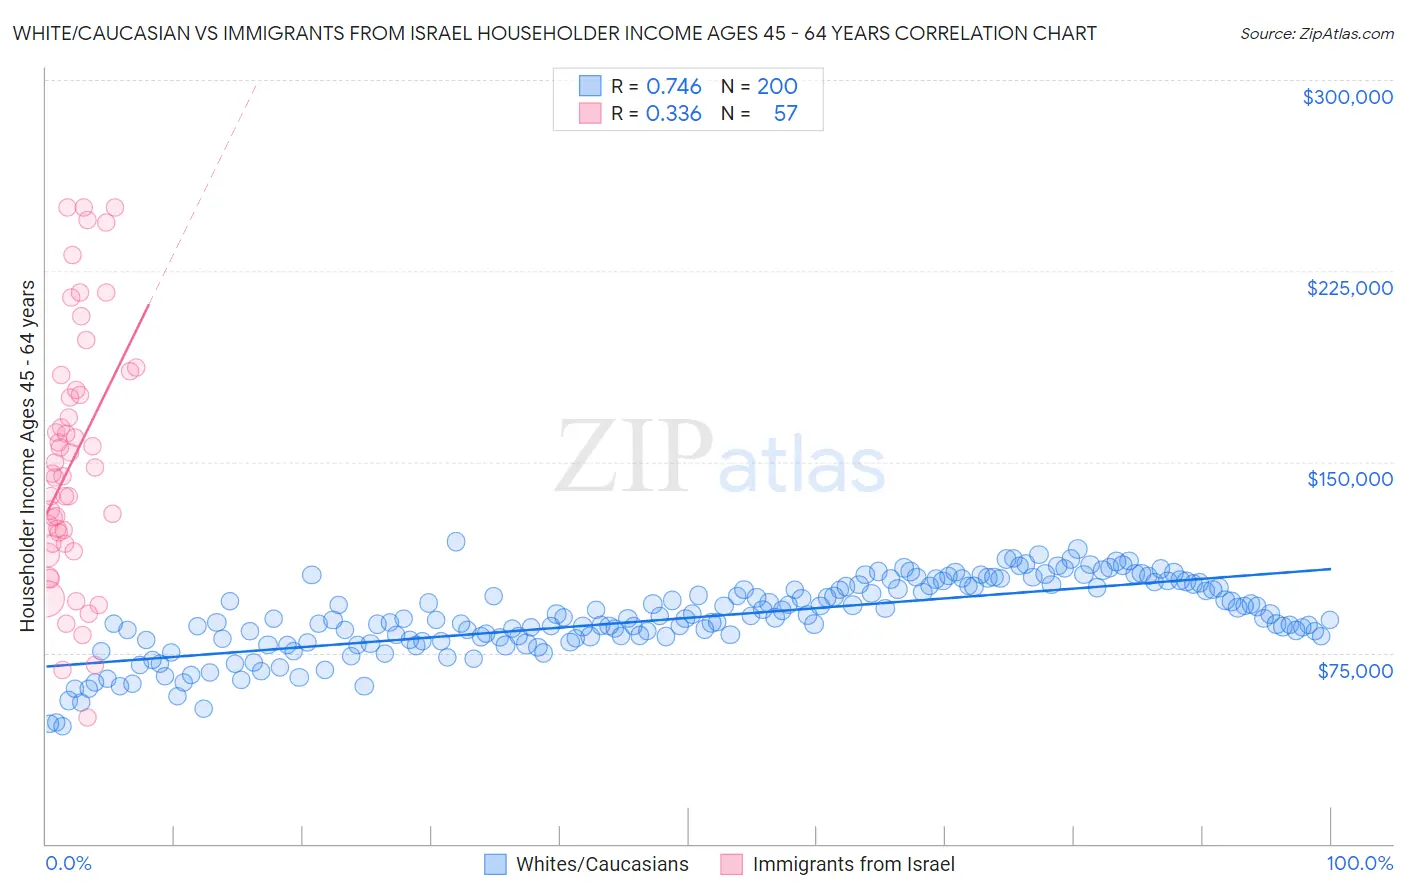 White/Caucasian vs Immigrants from Israel Householder Income Ages 45 - 64 years